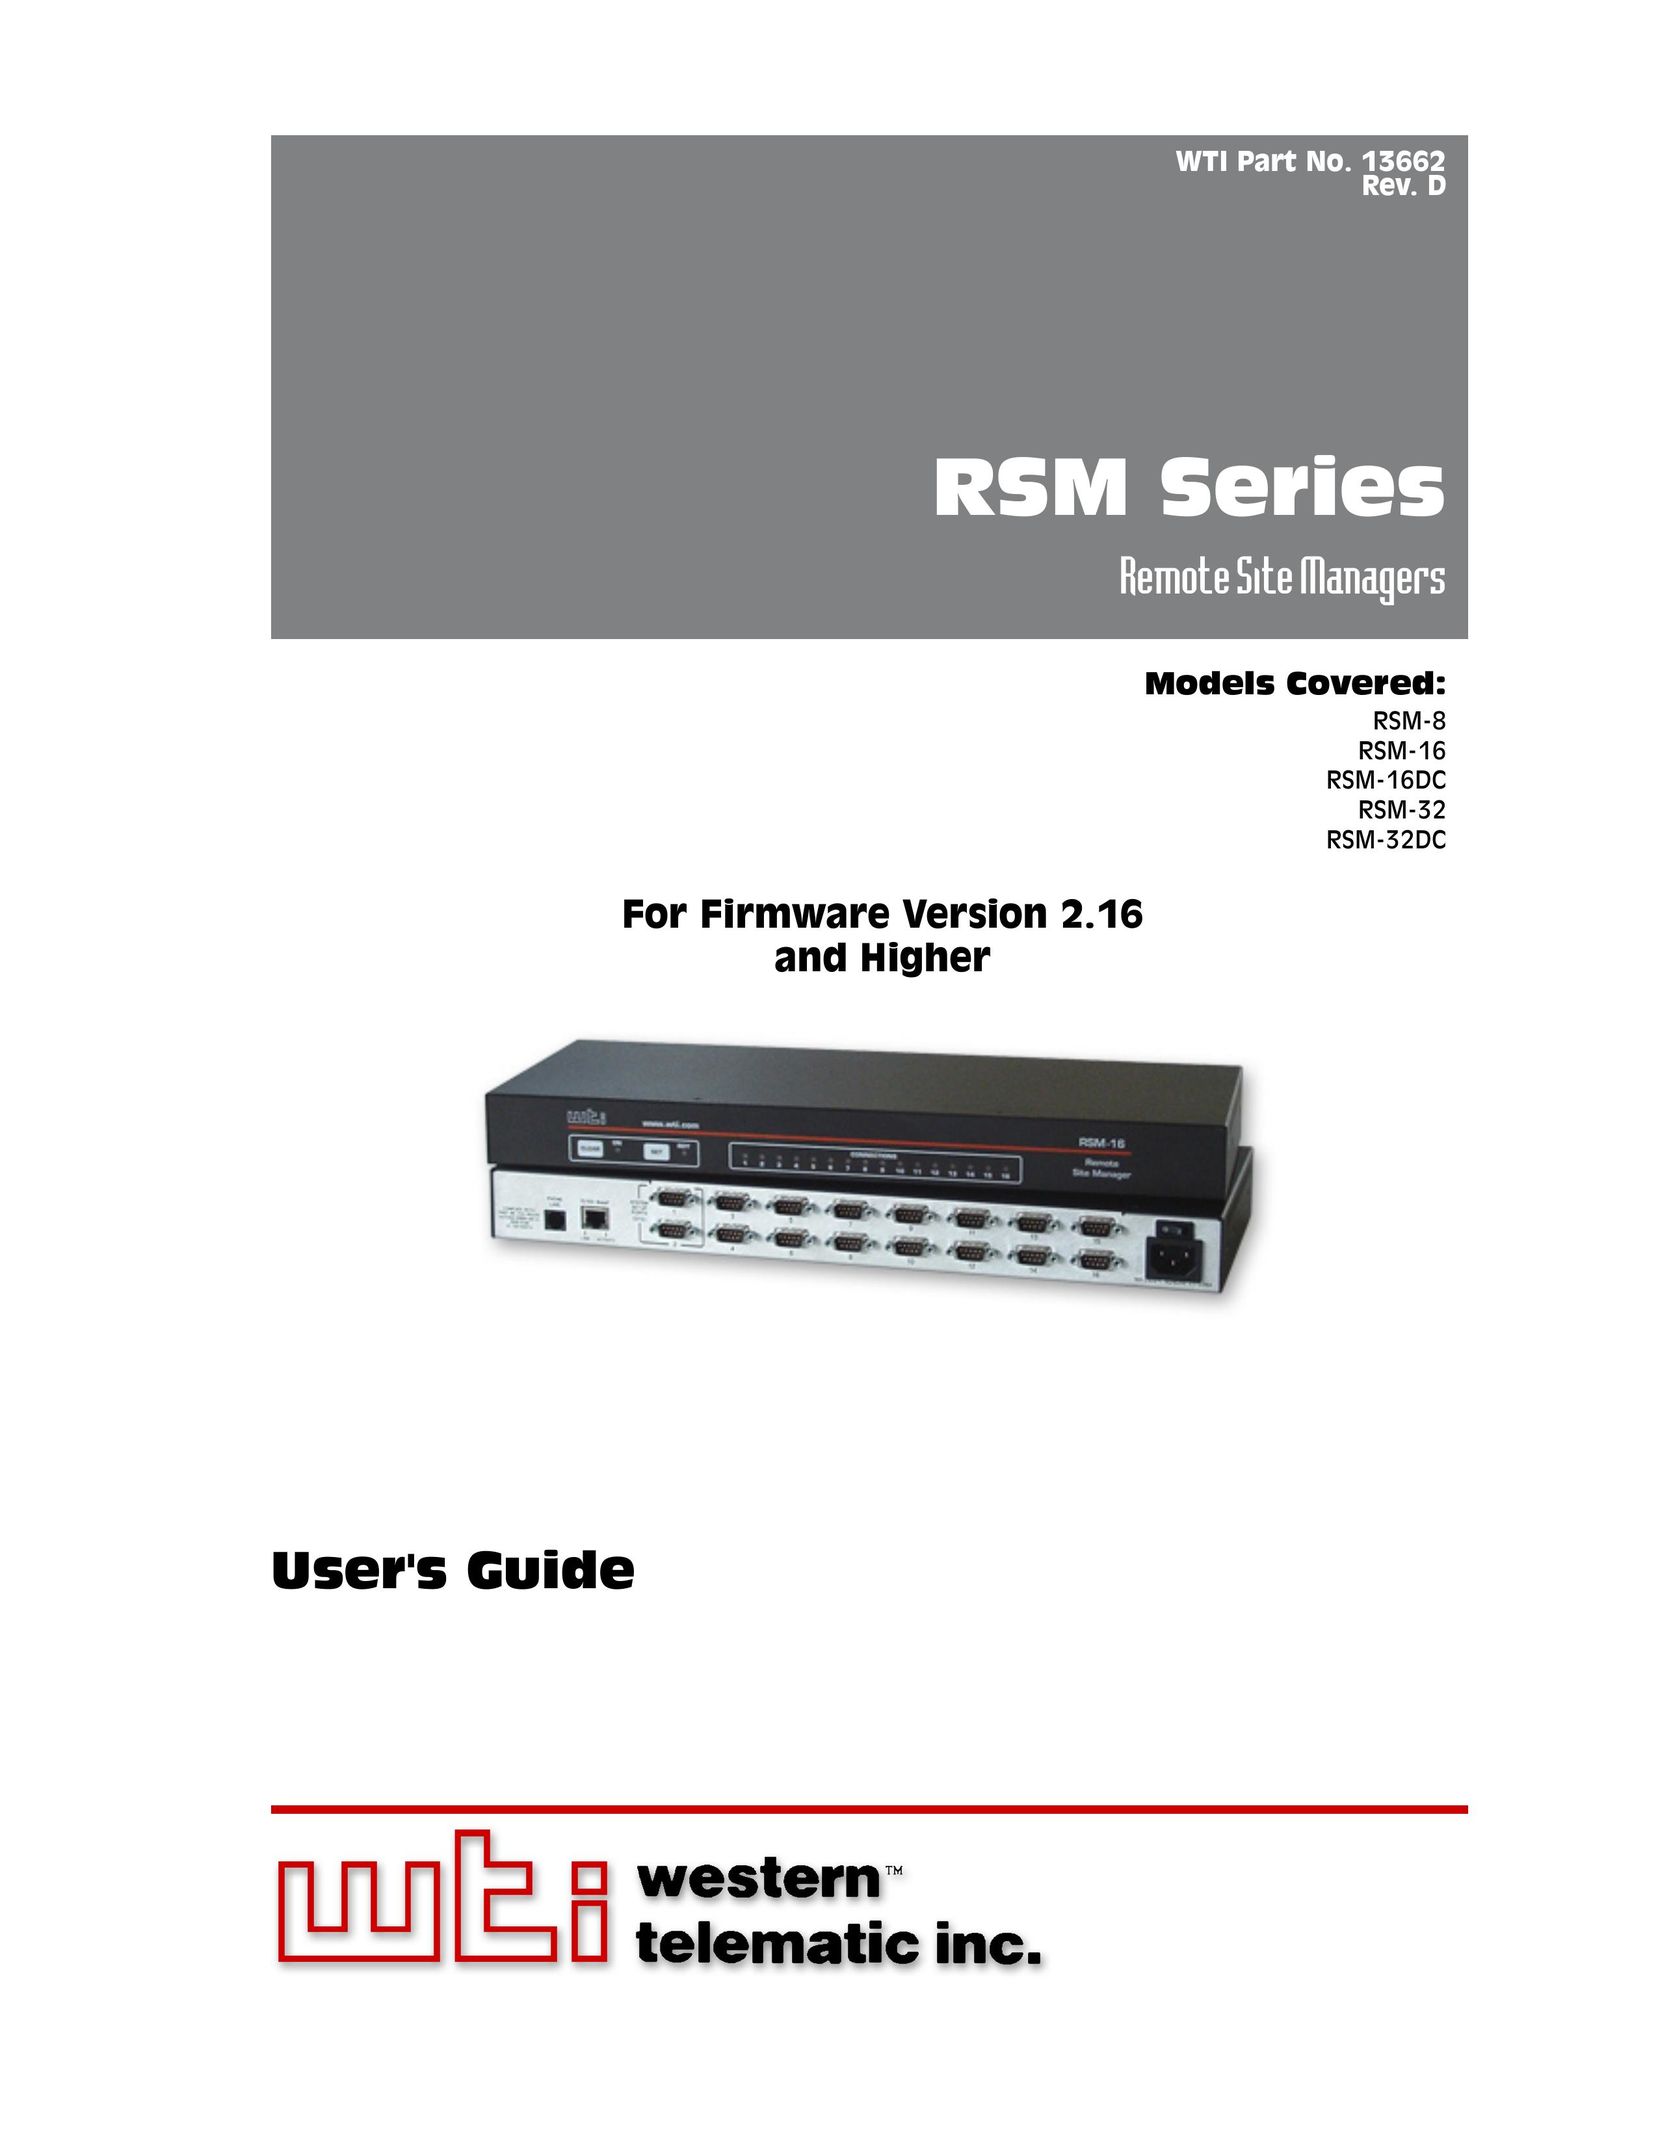 Western Telematic RSM-32 Video Gaming Accessories User Manual (Page 1)